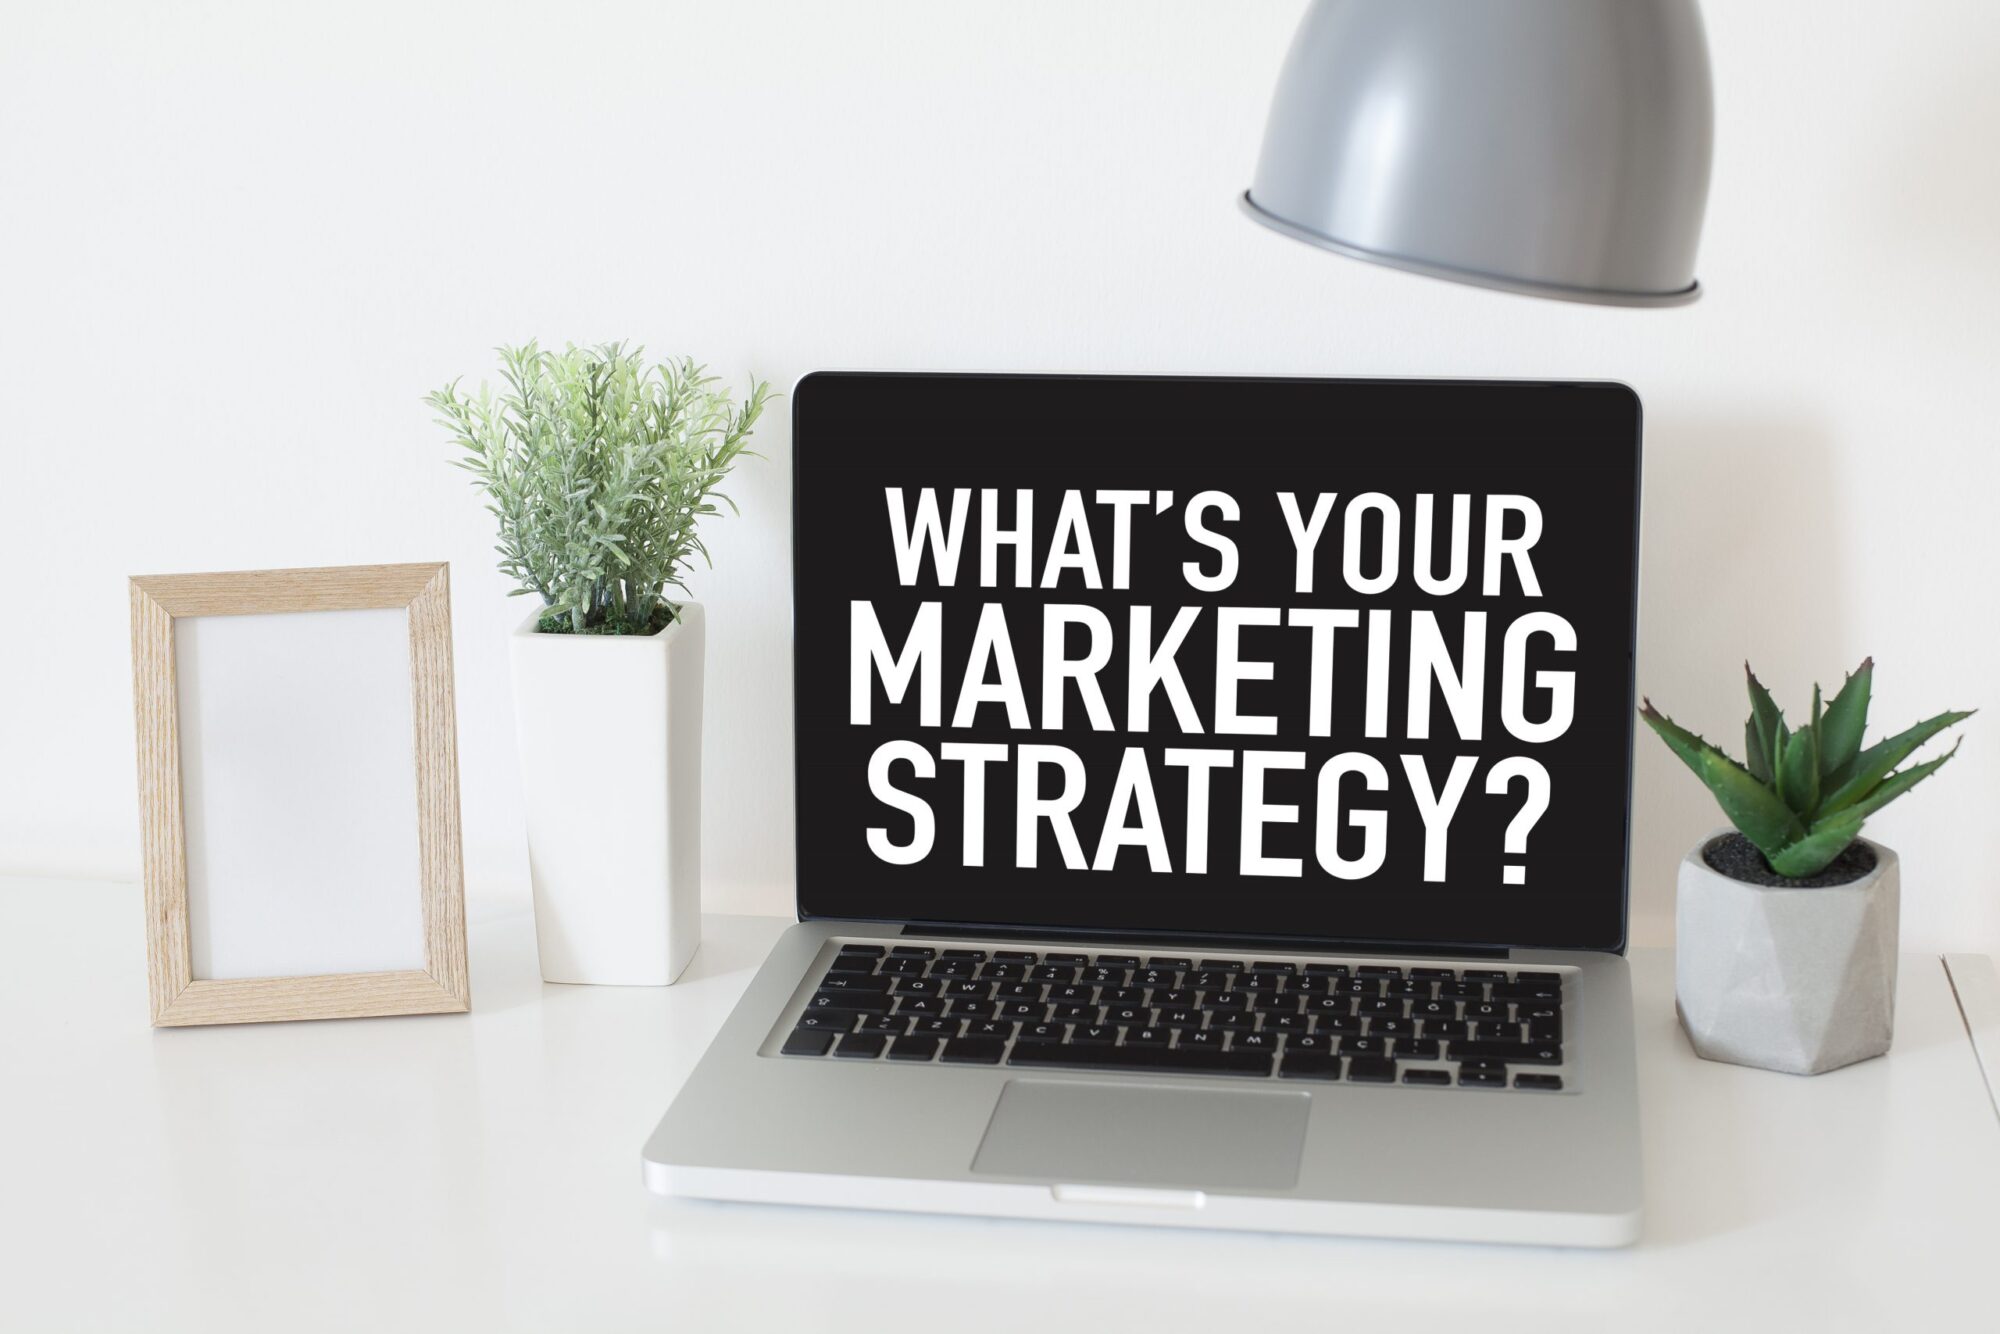 What is your marketing strategy